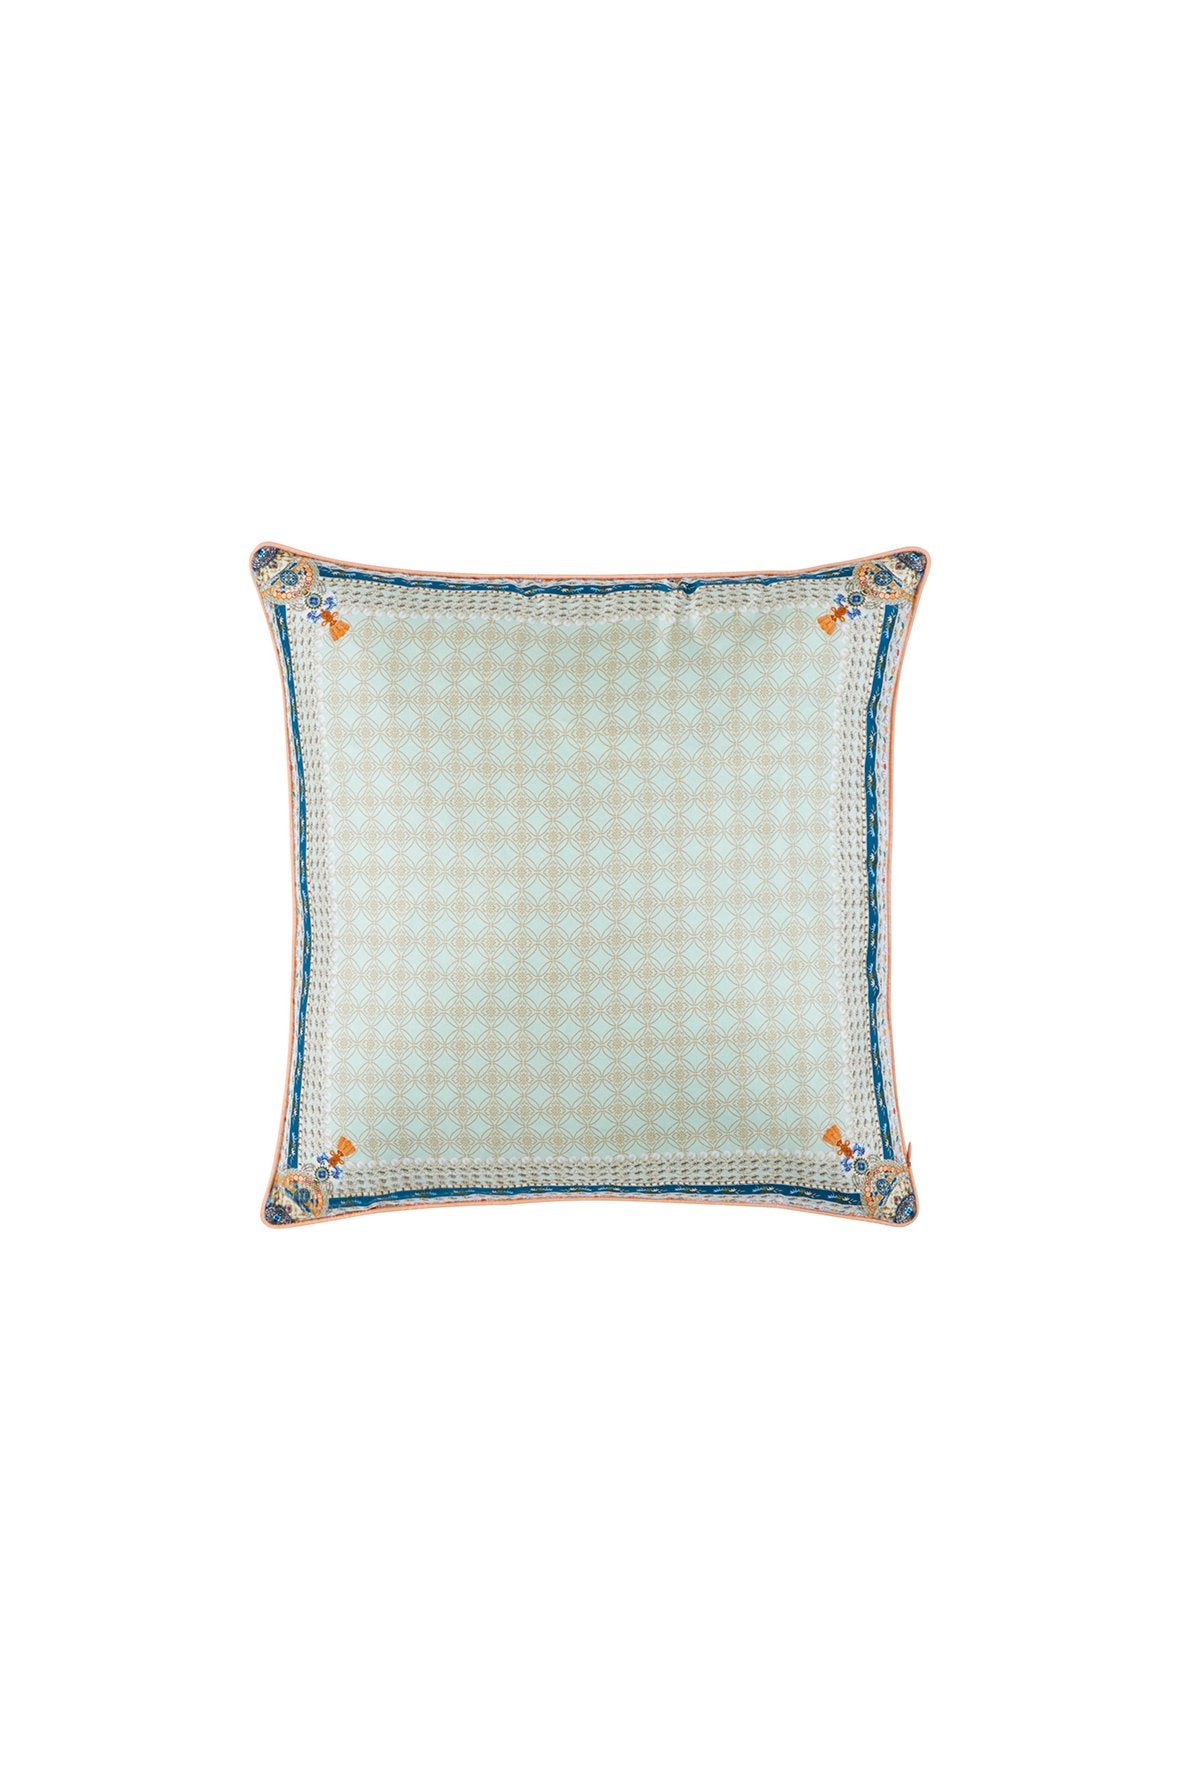 CAMILLA FOR THE FANS SMALL SQUARE CUSHION